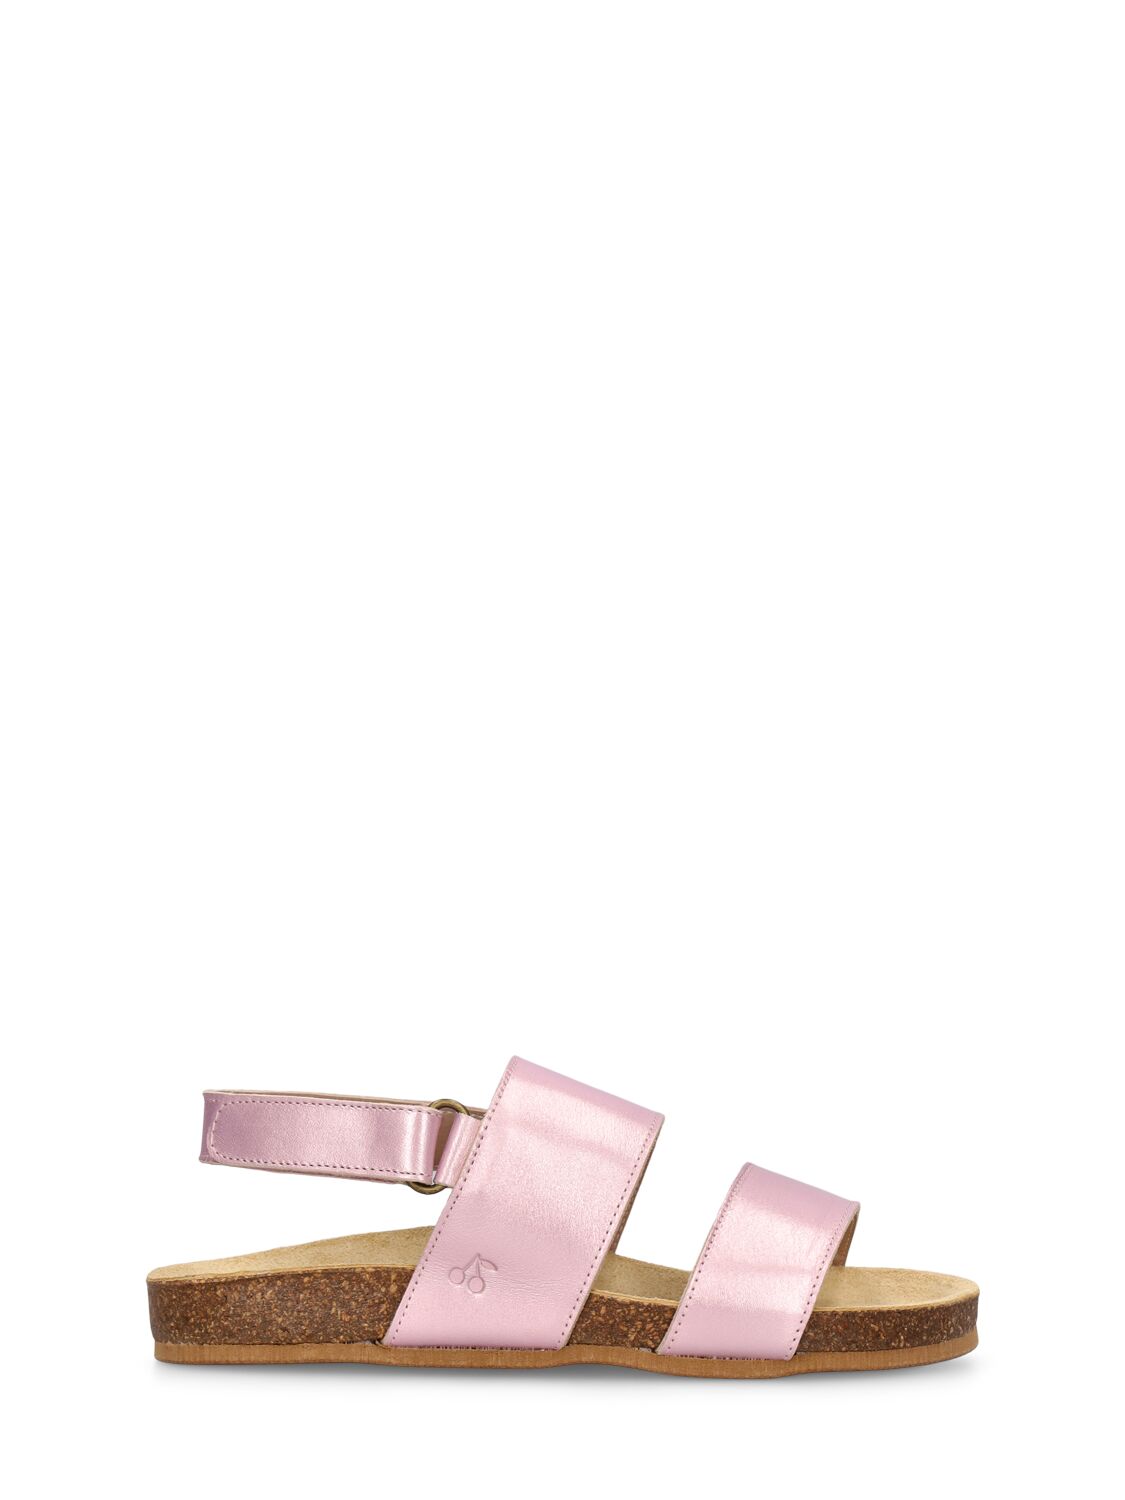 Bonpoint Kids' Leather Sandals In Pink